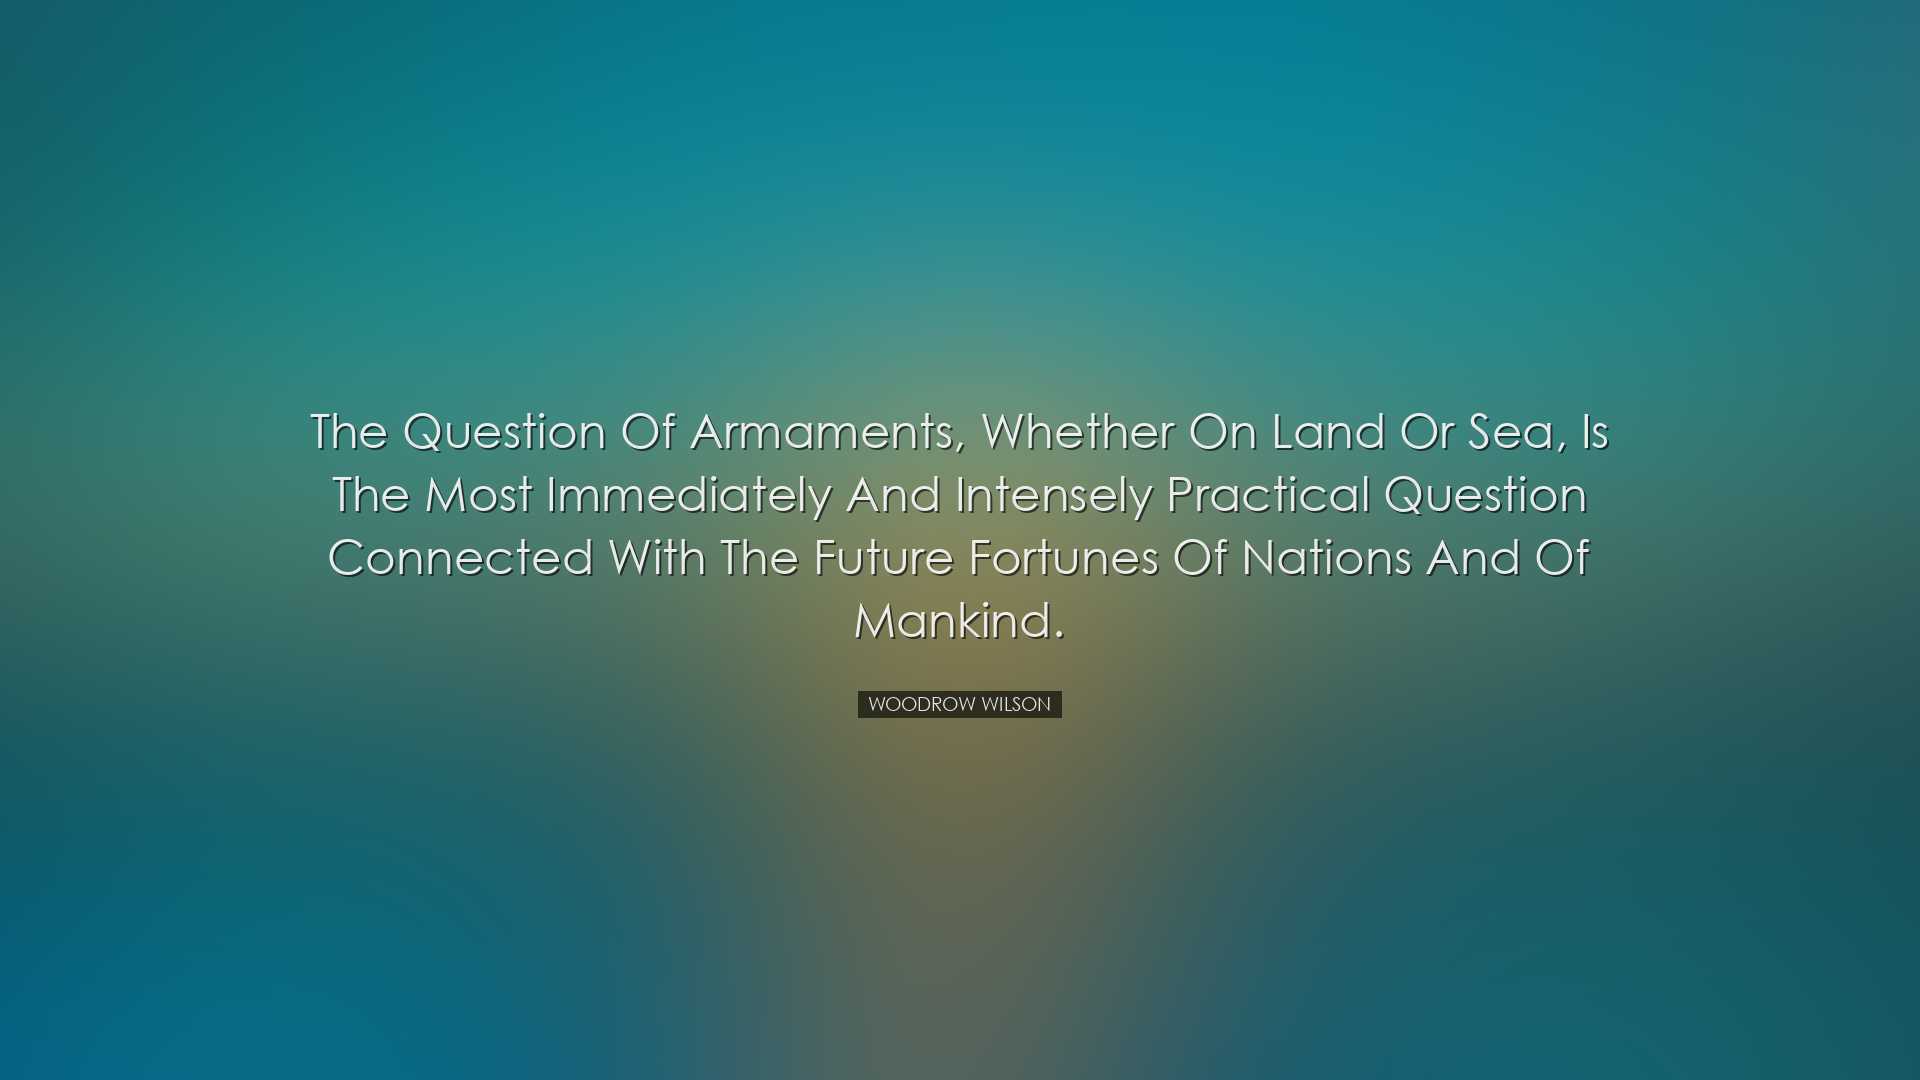 The question of armaments, whether on land or sea, is the most imm